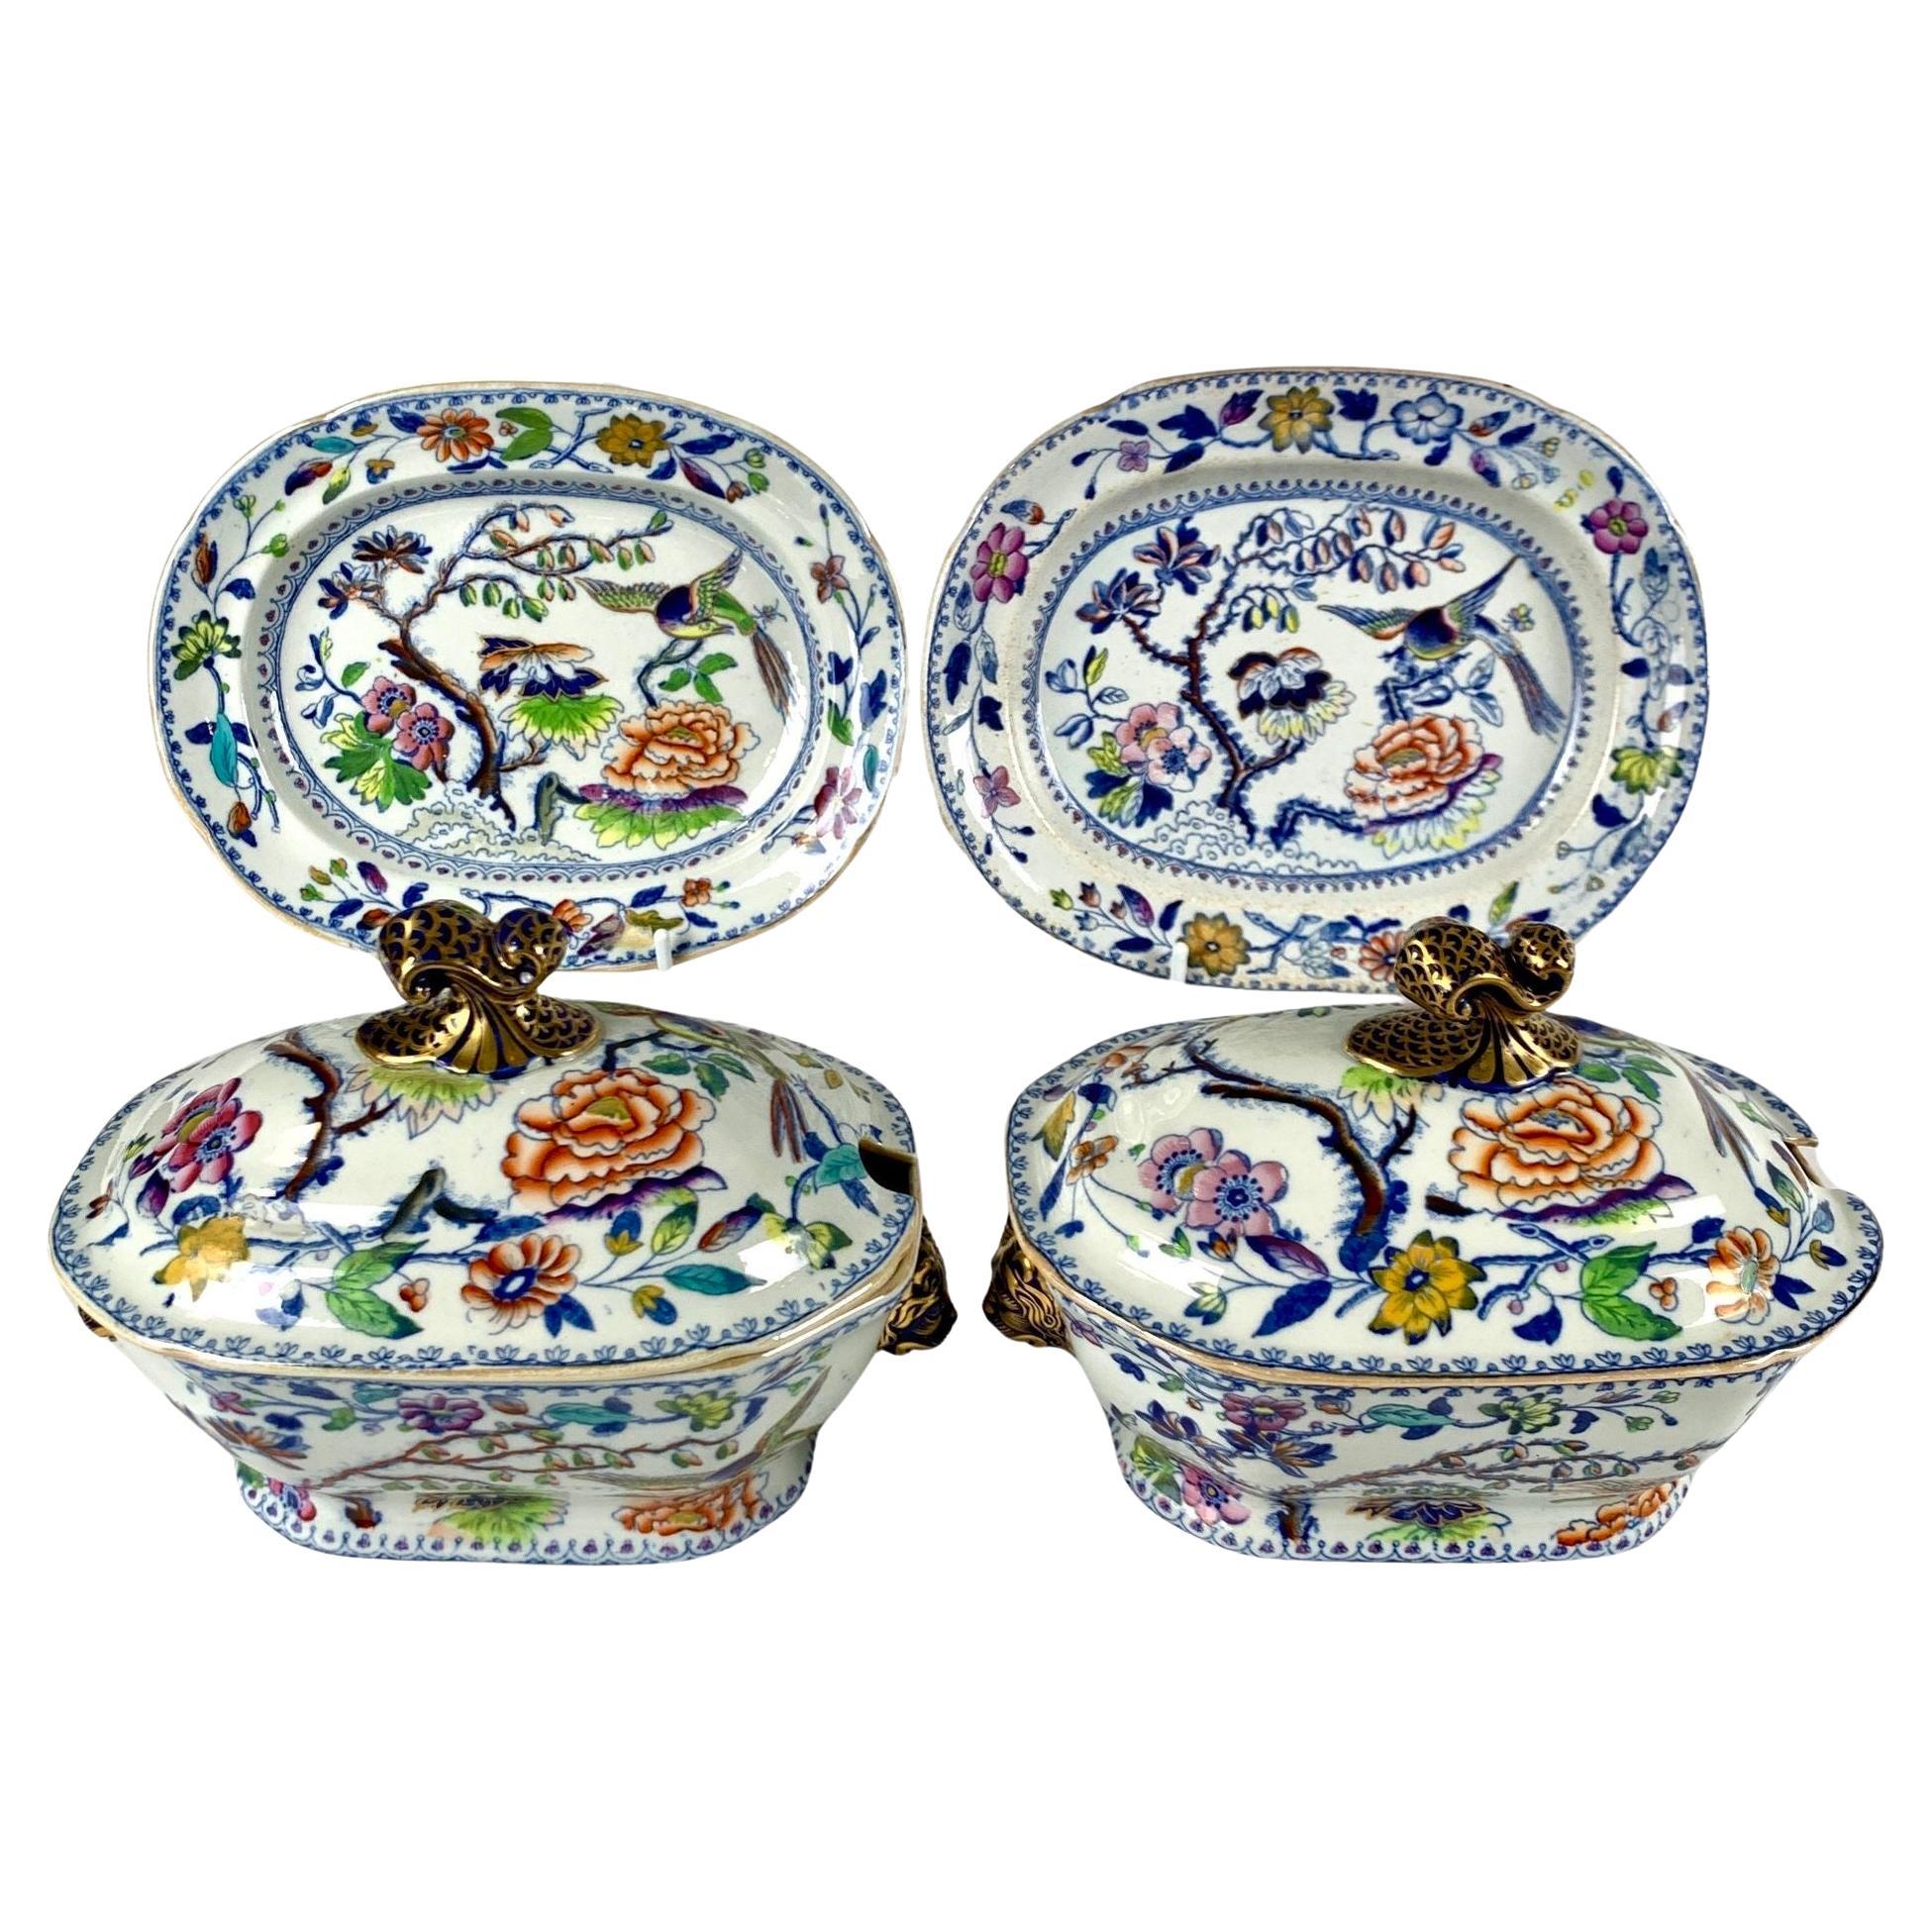 The Davenport flying bird pattern has been much sought after since it was first made in England circa 1813.
This lively and colorful pattern features an elegant bird with a long tail flying above a garden with exquisite leaves and beautiful